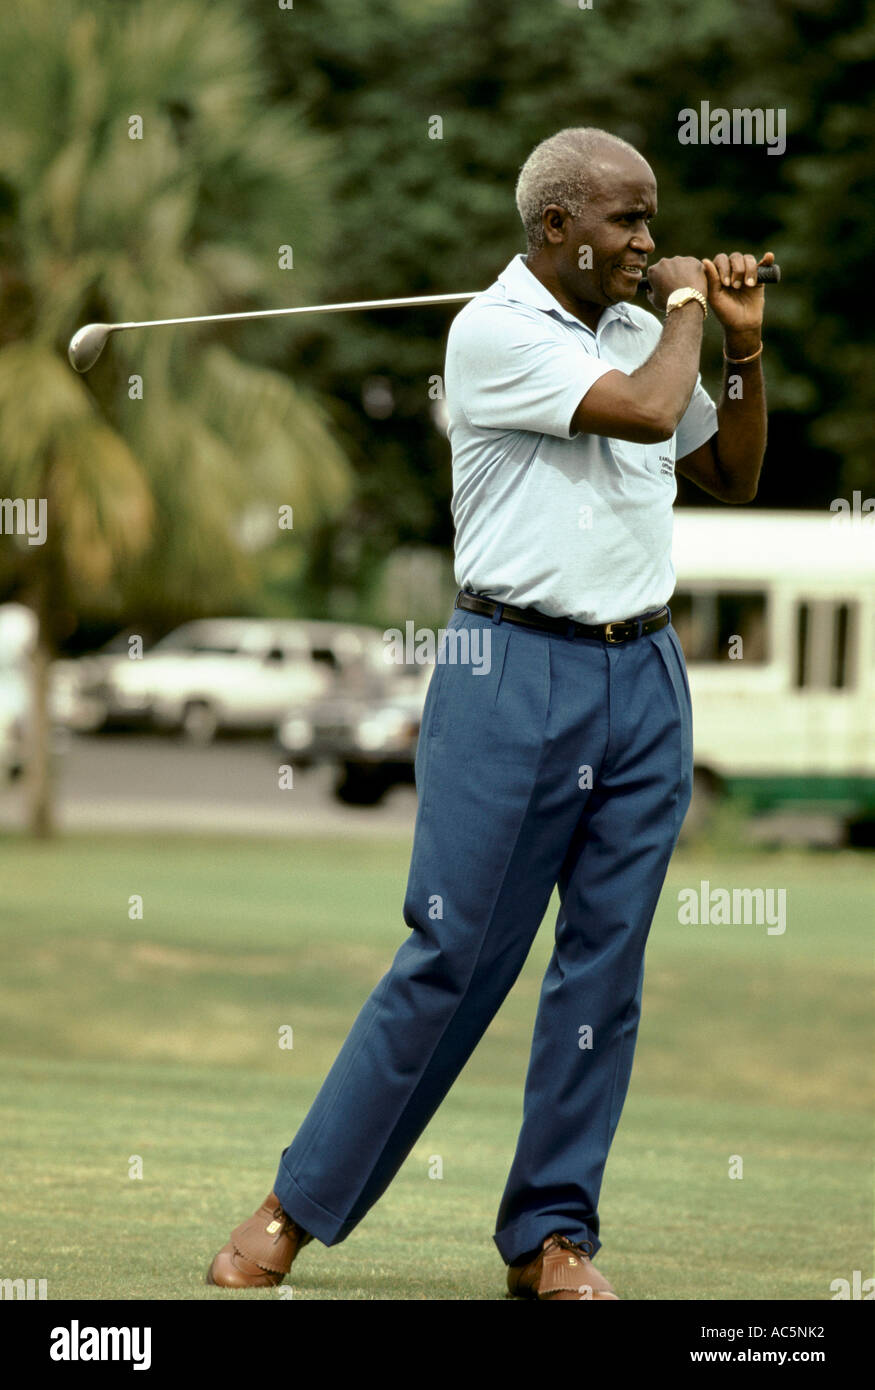 Kenneth Kaunda African Politician The First President Of Zambia Playing Golf Stock Photo Alamy